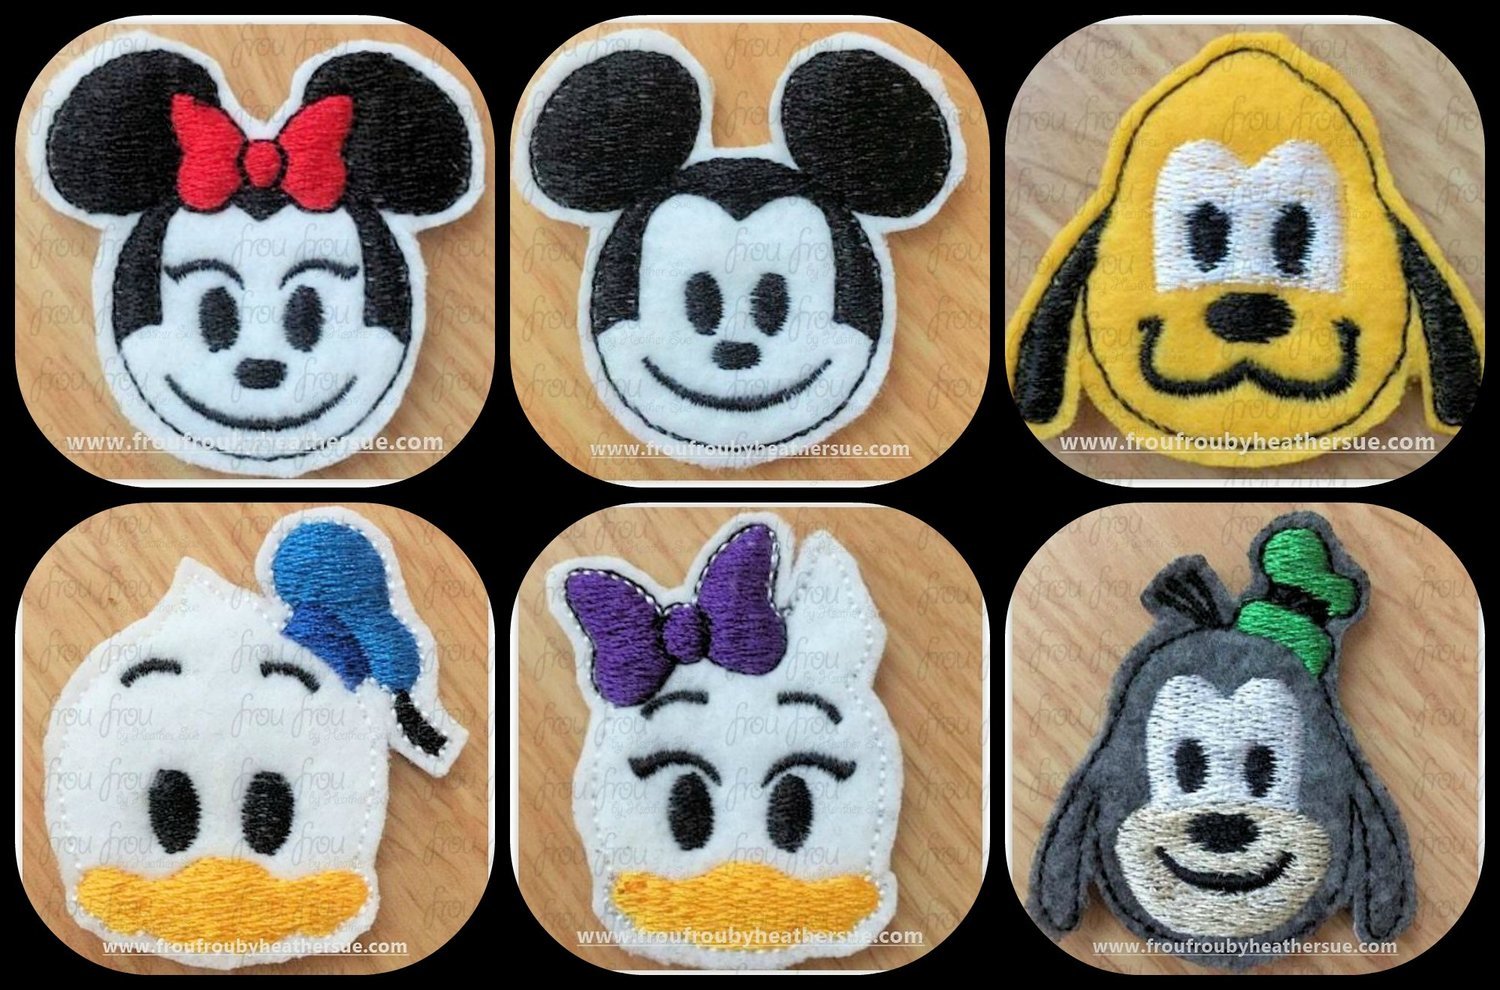 Clippies Mister Mouse and Friends Emoji Fab SIX Design SET machine embroidery design, multiple sizes 1.5